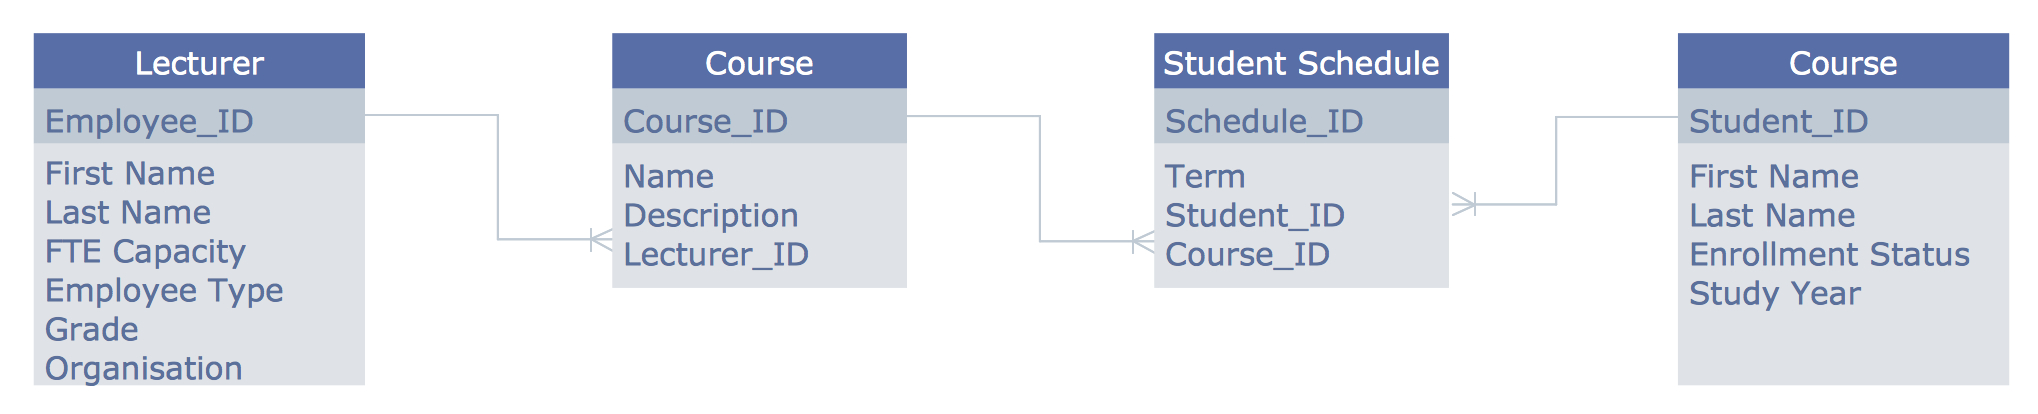 Entity Relationship Diagram (Erd) Solution | Conceptdraw with regard to Erd Full Form